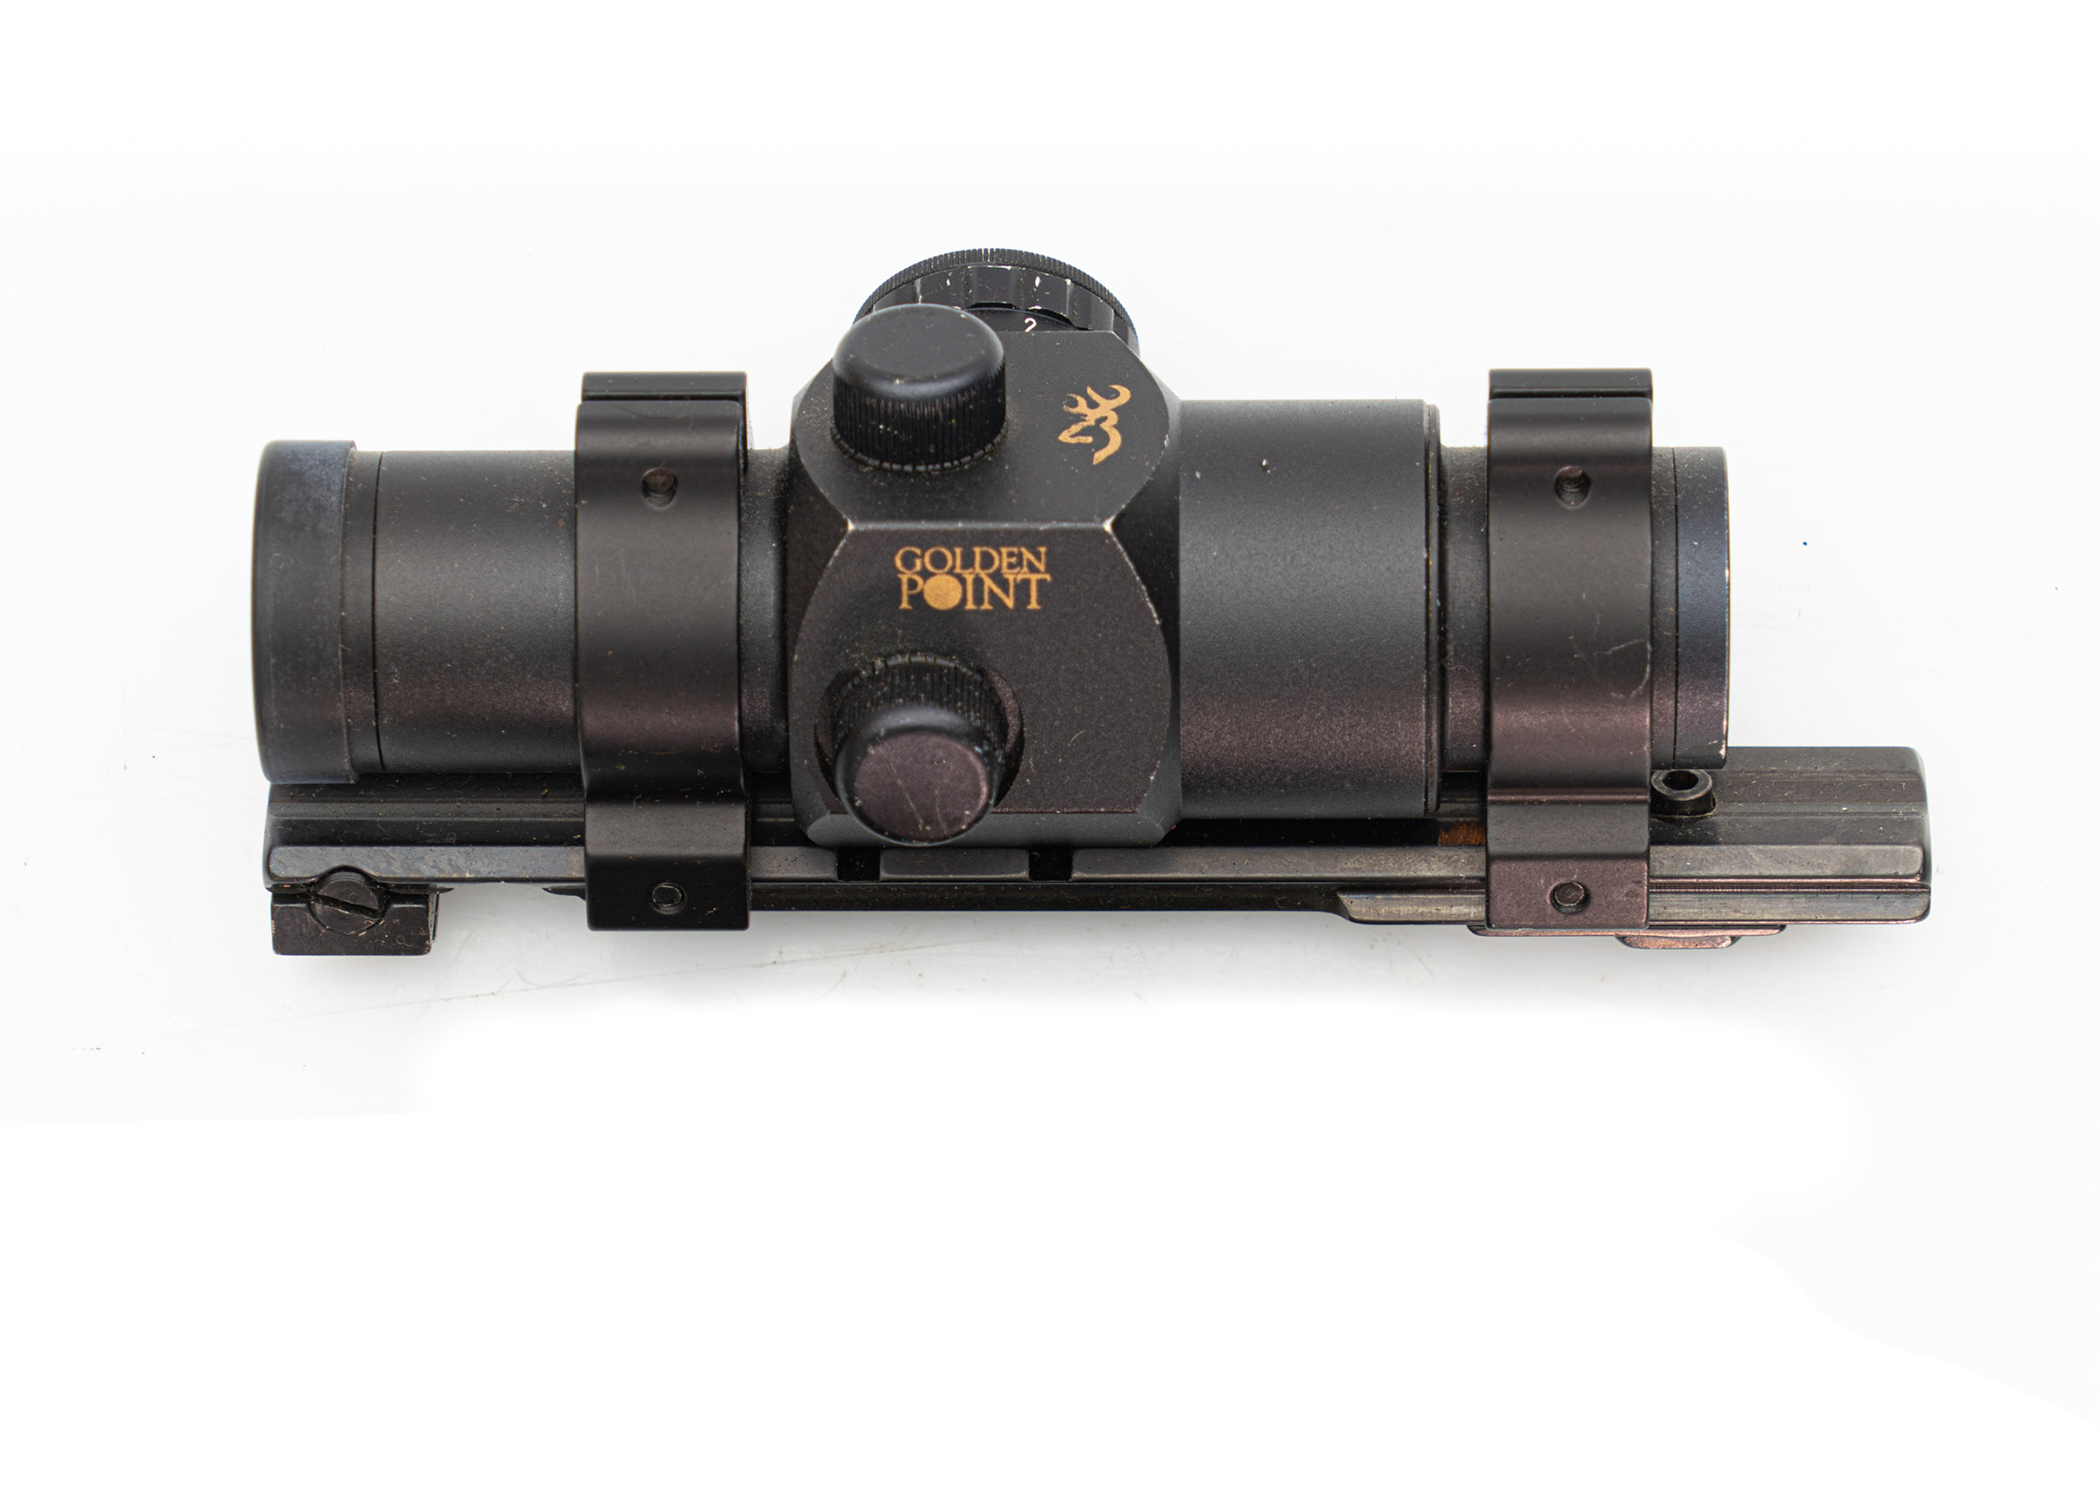 Browning Golden Point red dot sight